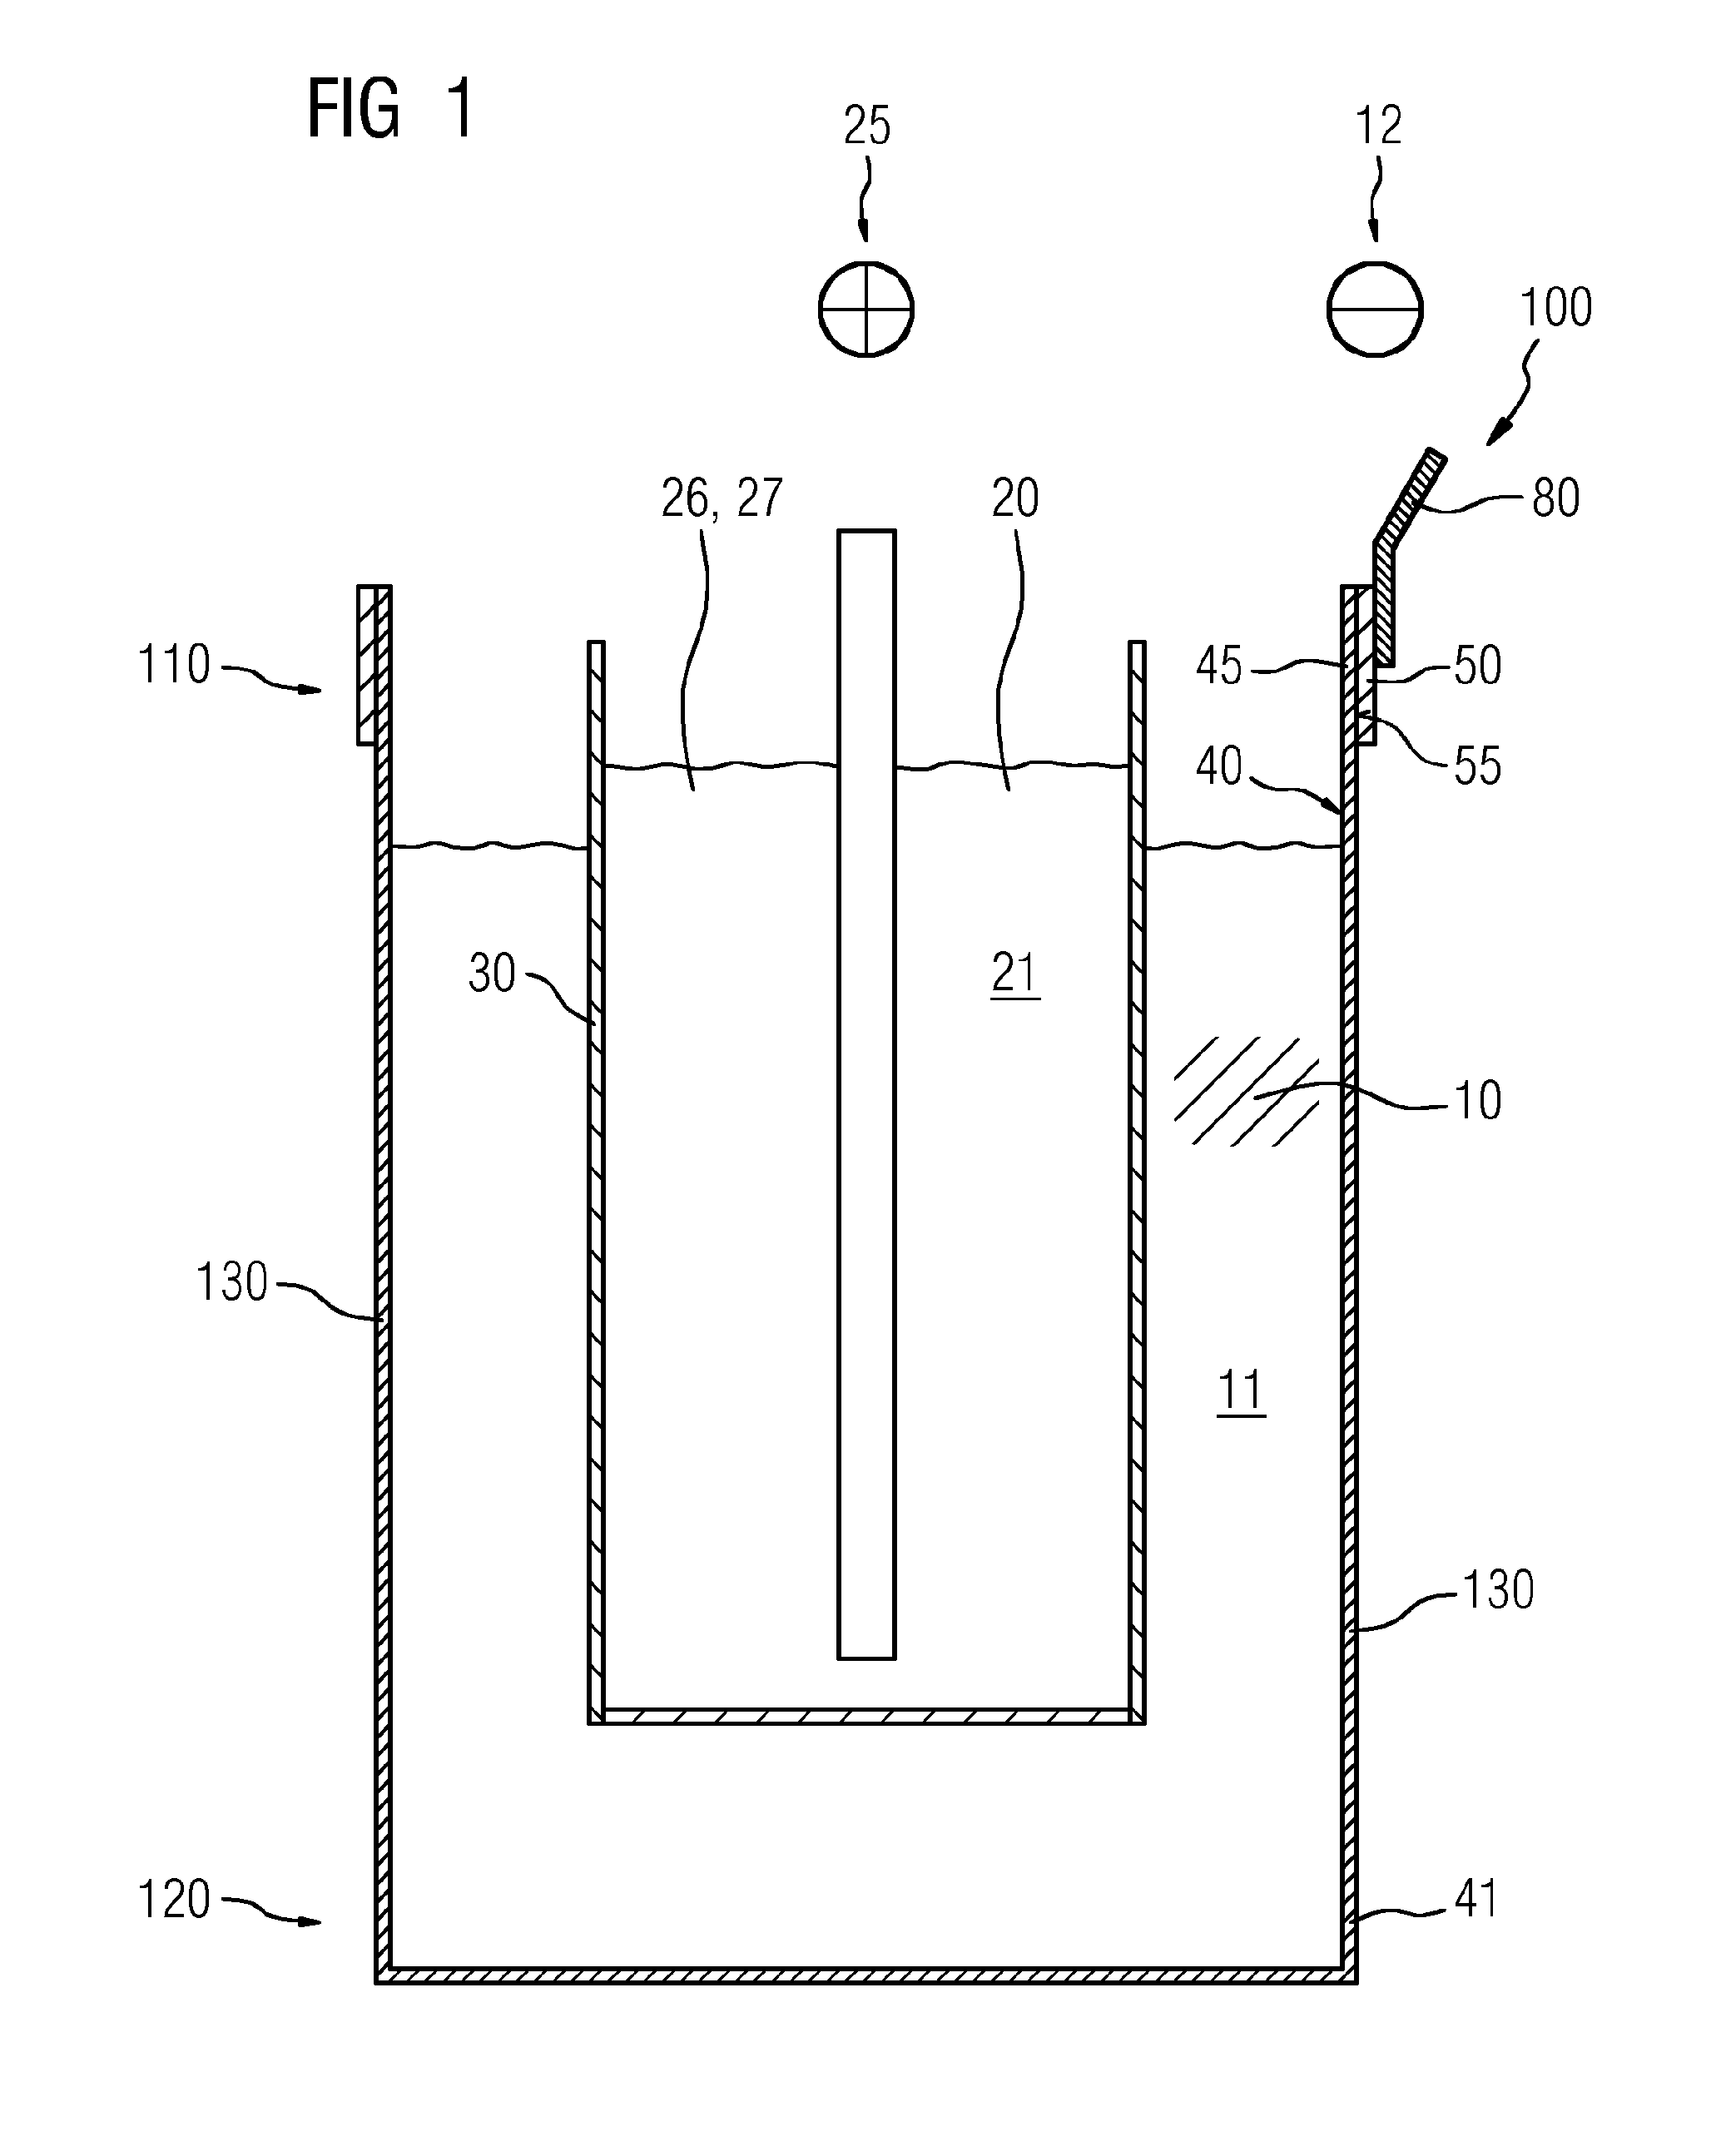 Electrochemical storage device having improved electrical conduction properties